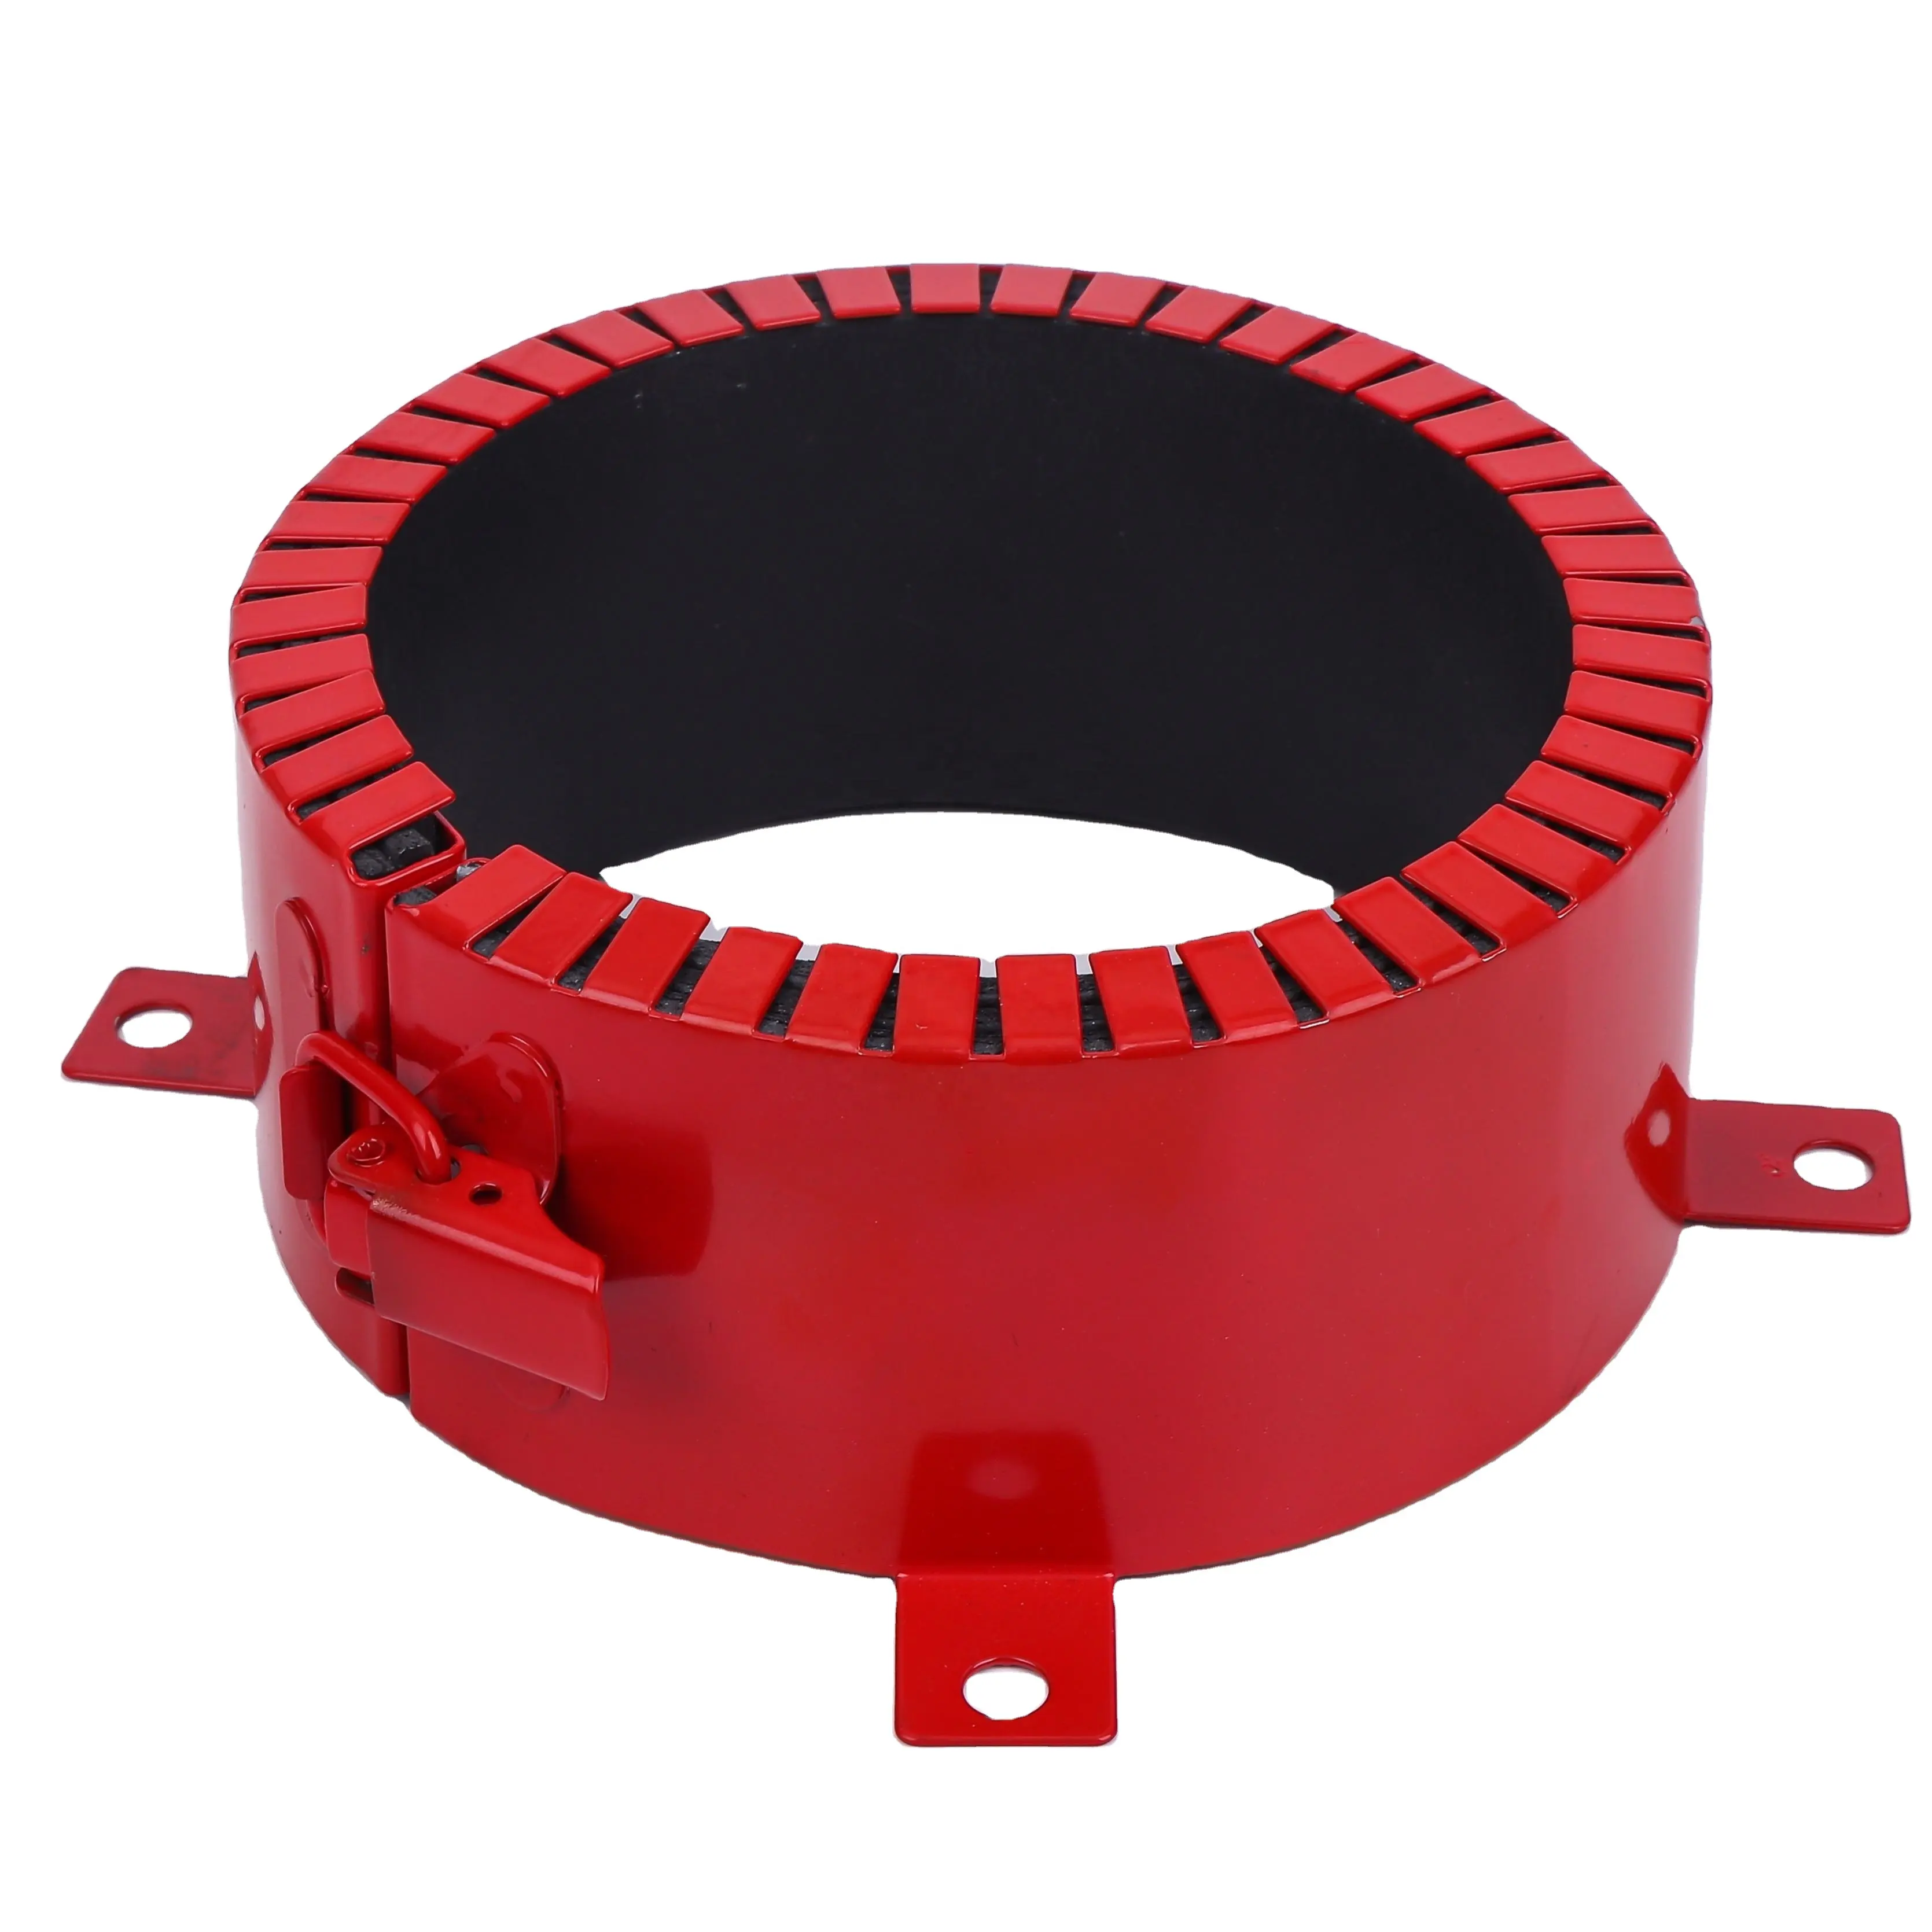 Firestop collar for pipe penetration collar Suppliers and Manufacturers